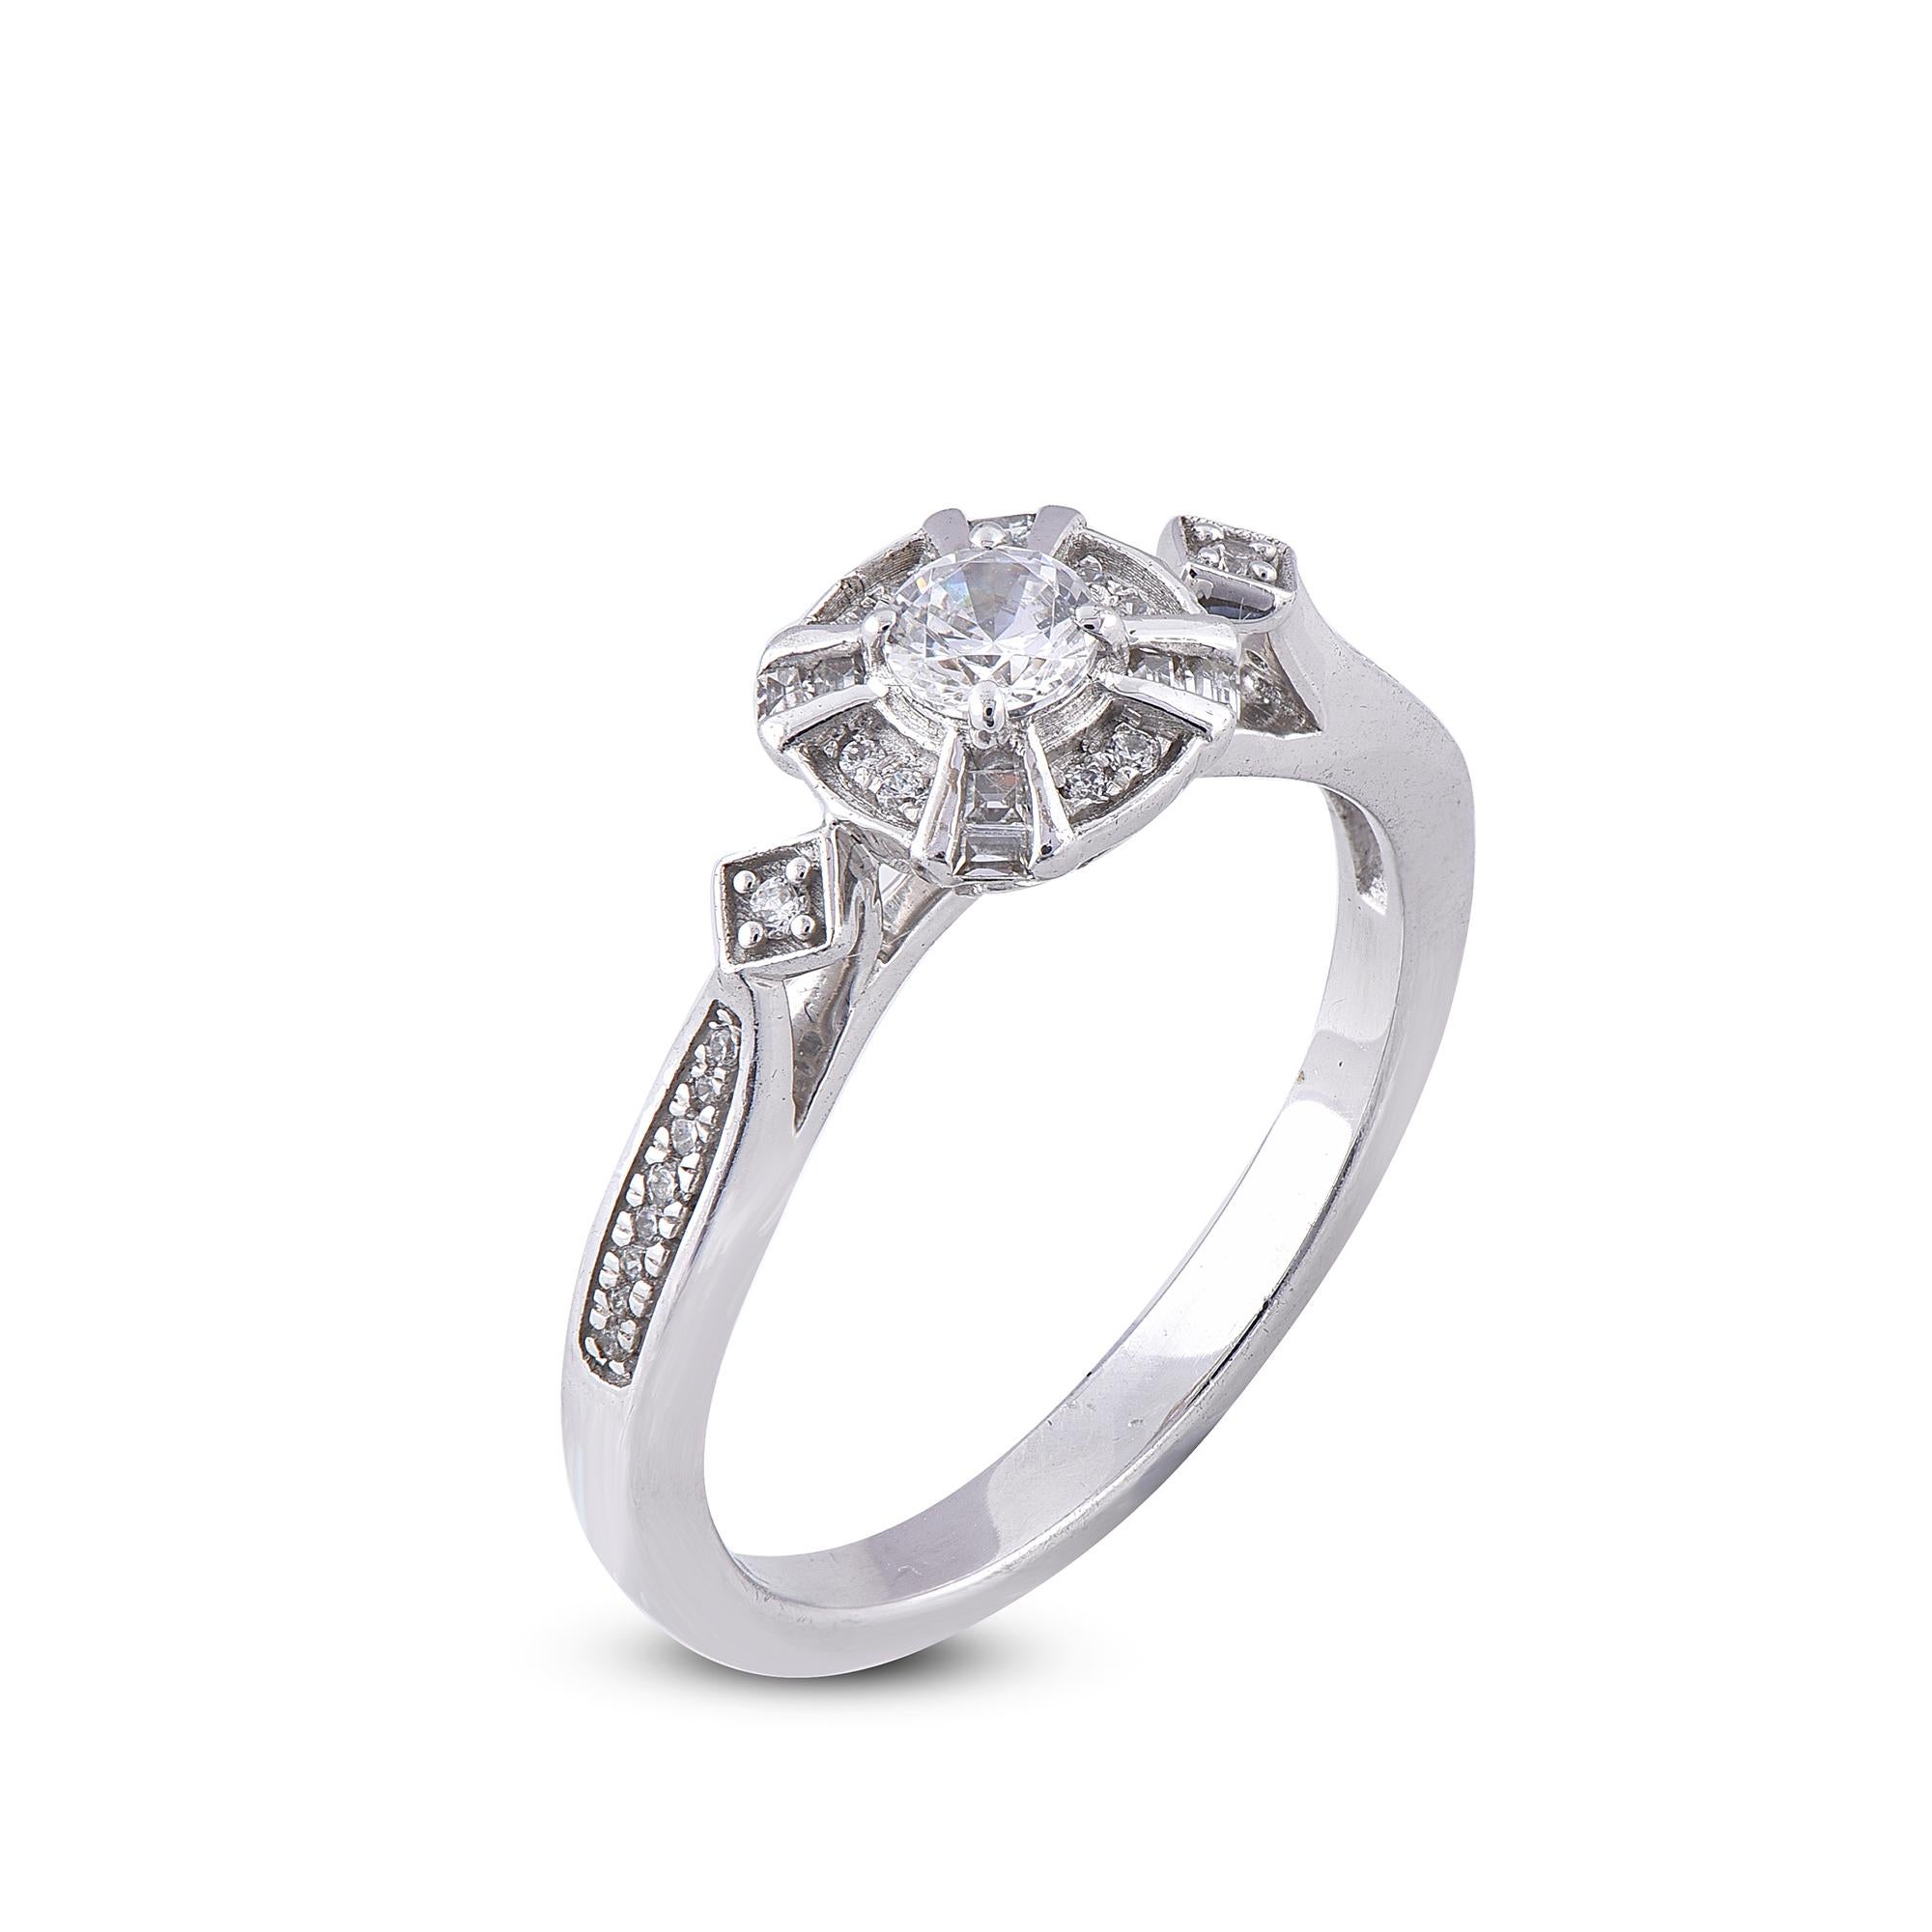 Hand crafted by our inhouse experts in 14 karat white gold the engagement ring features 0.33 ct of lined diamond studded with 27 round and 8 baguette cut diamonds beautifully set in prong and pave setting. Dazzles in H-I color I2 clarity
